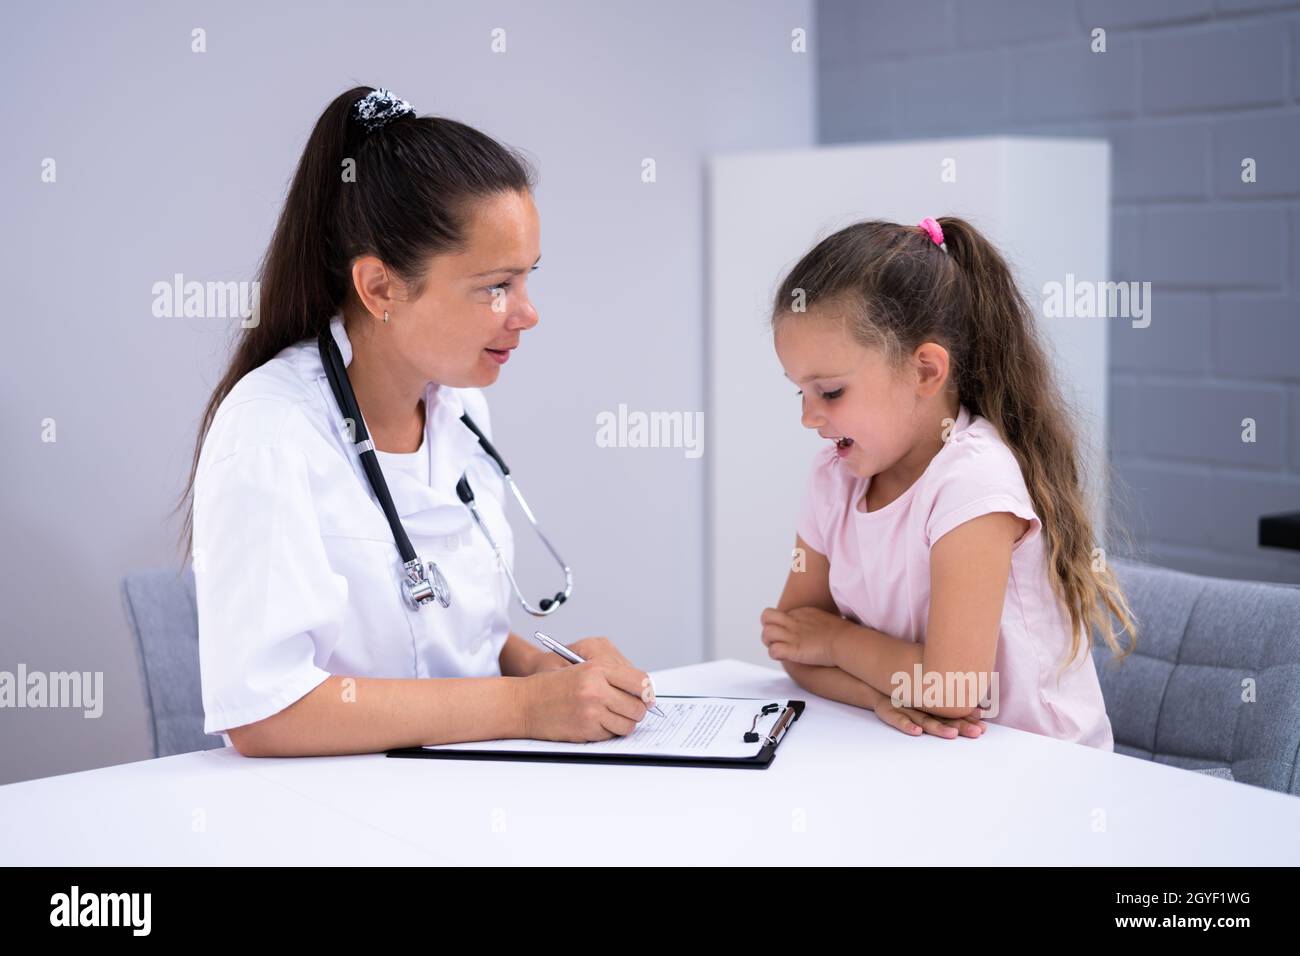 Sick Child Therapy. Therapist Comforting Kid At Hospital Stock Photo